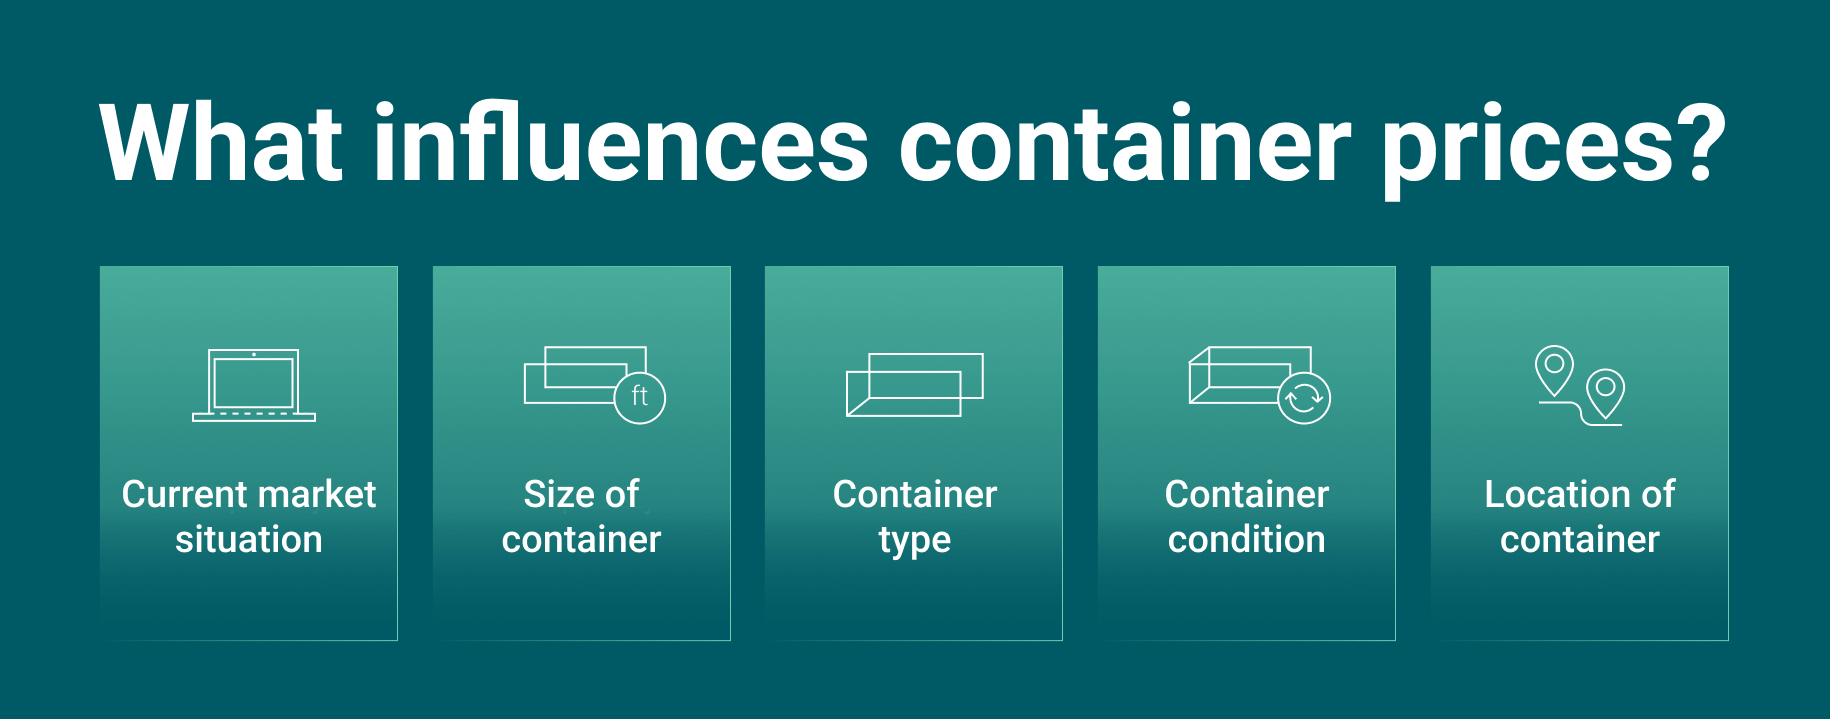 What factors influence container prices